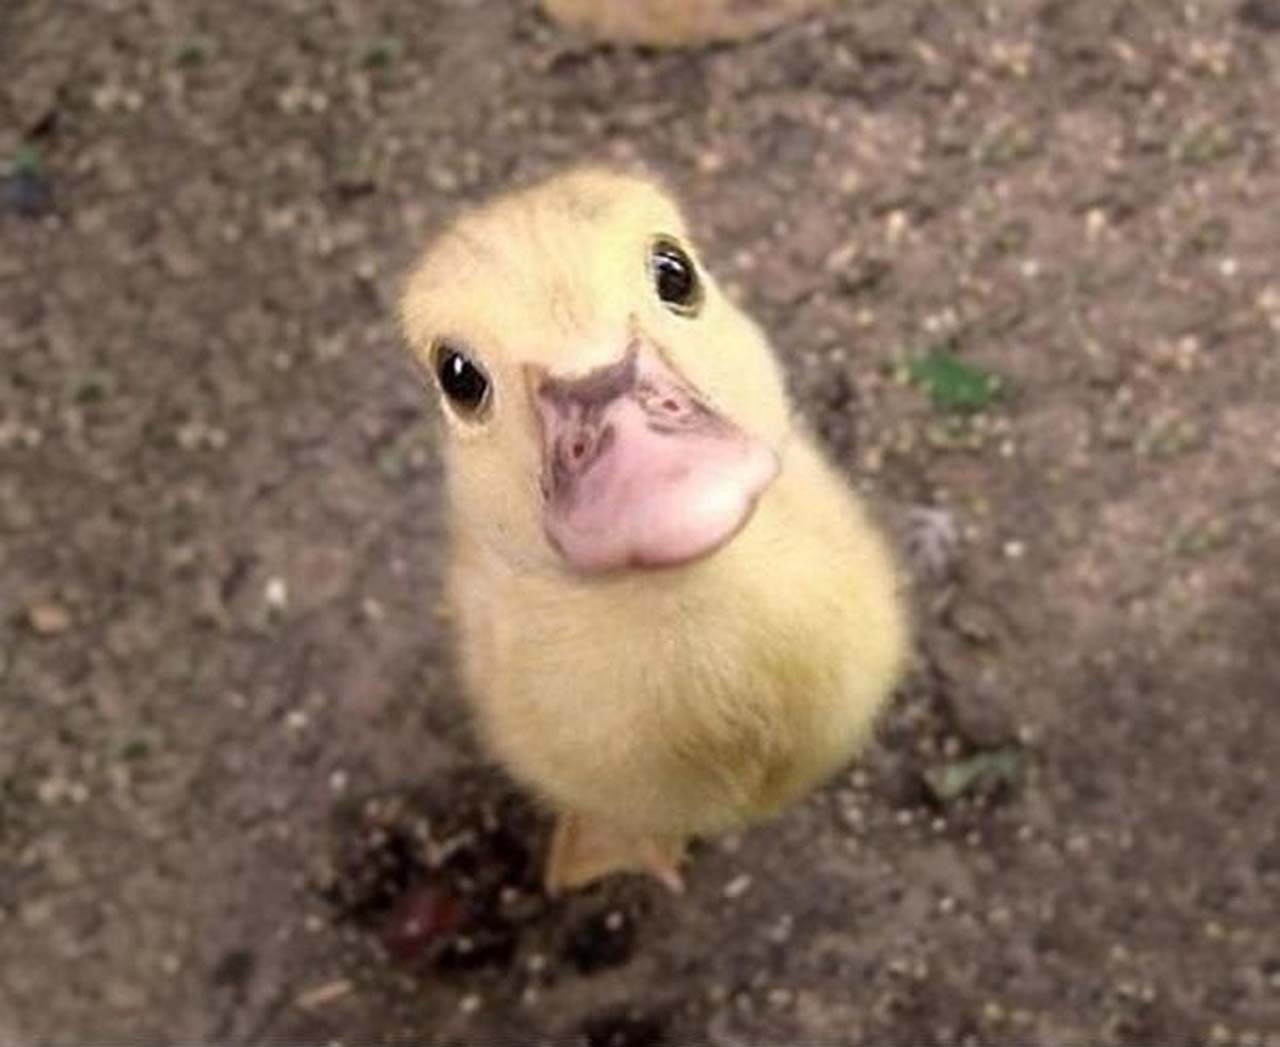 27 Adorable & Tiny Animals That Are Too Cute To Handle #2: Duck